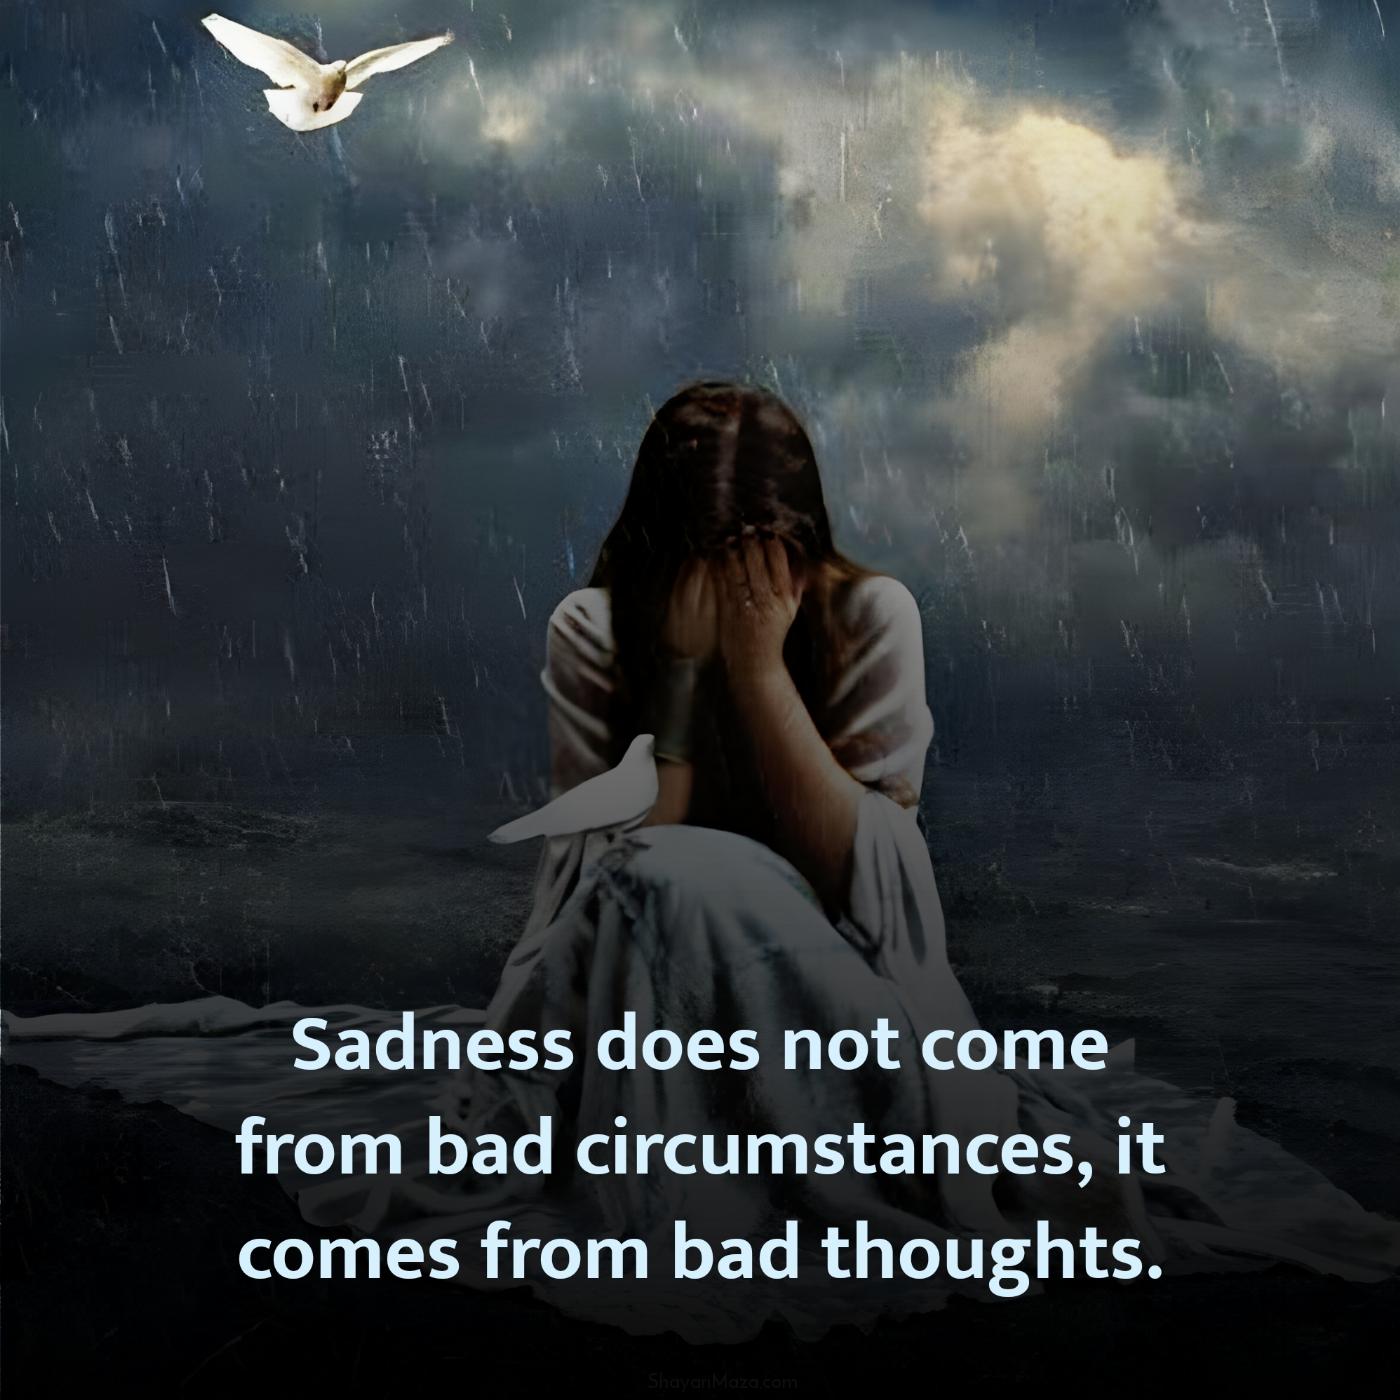 Sadness does not come from bad circumstances